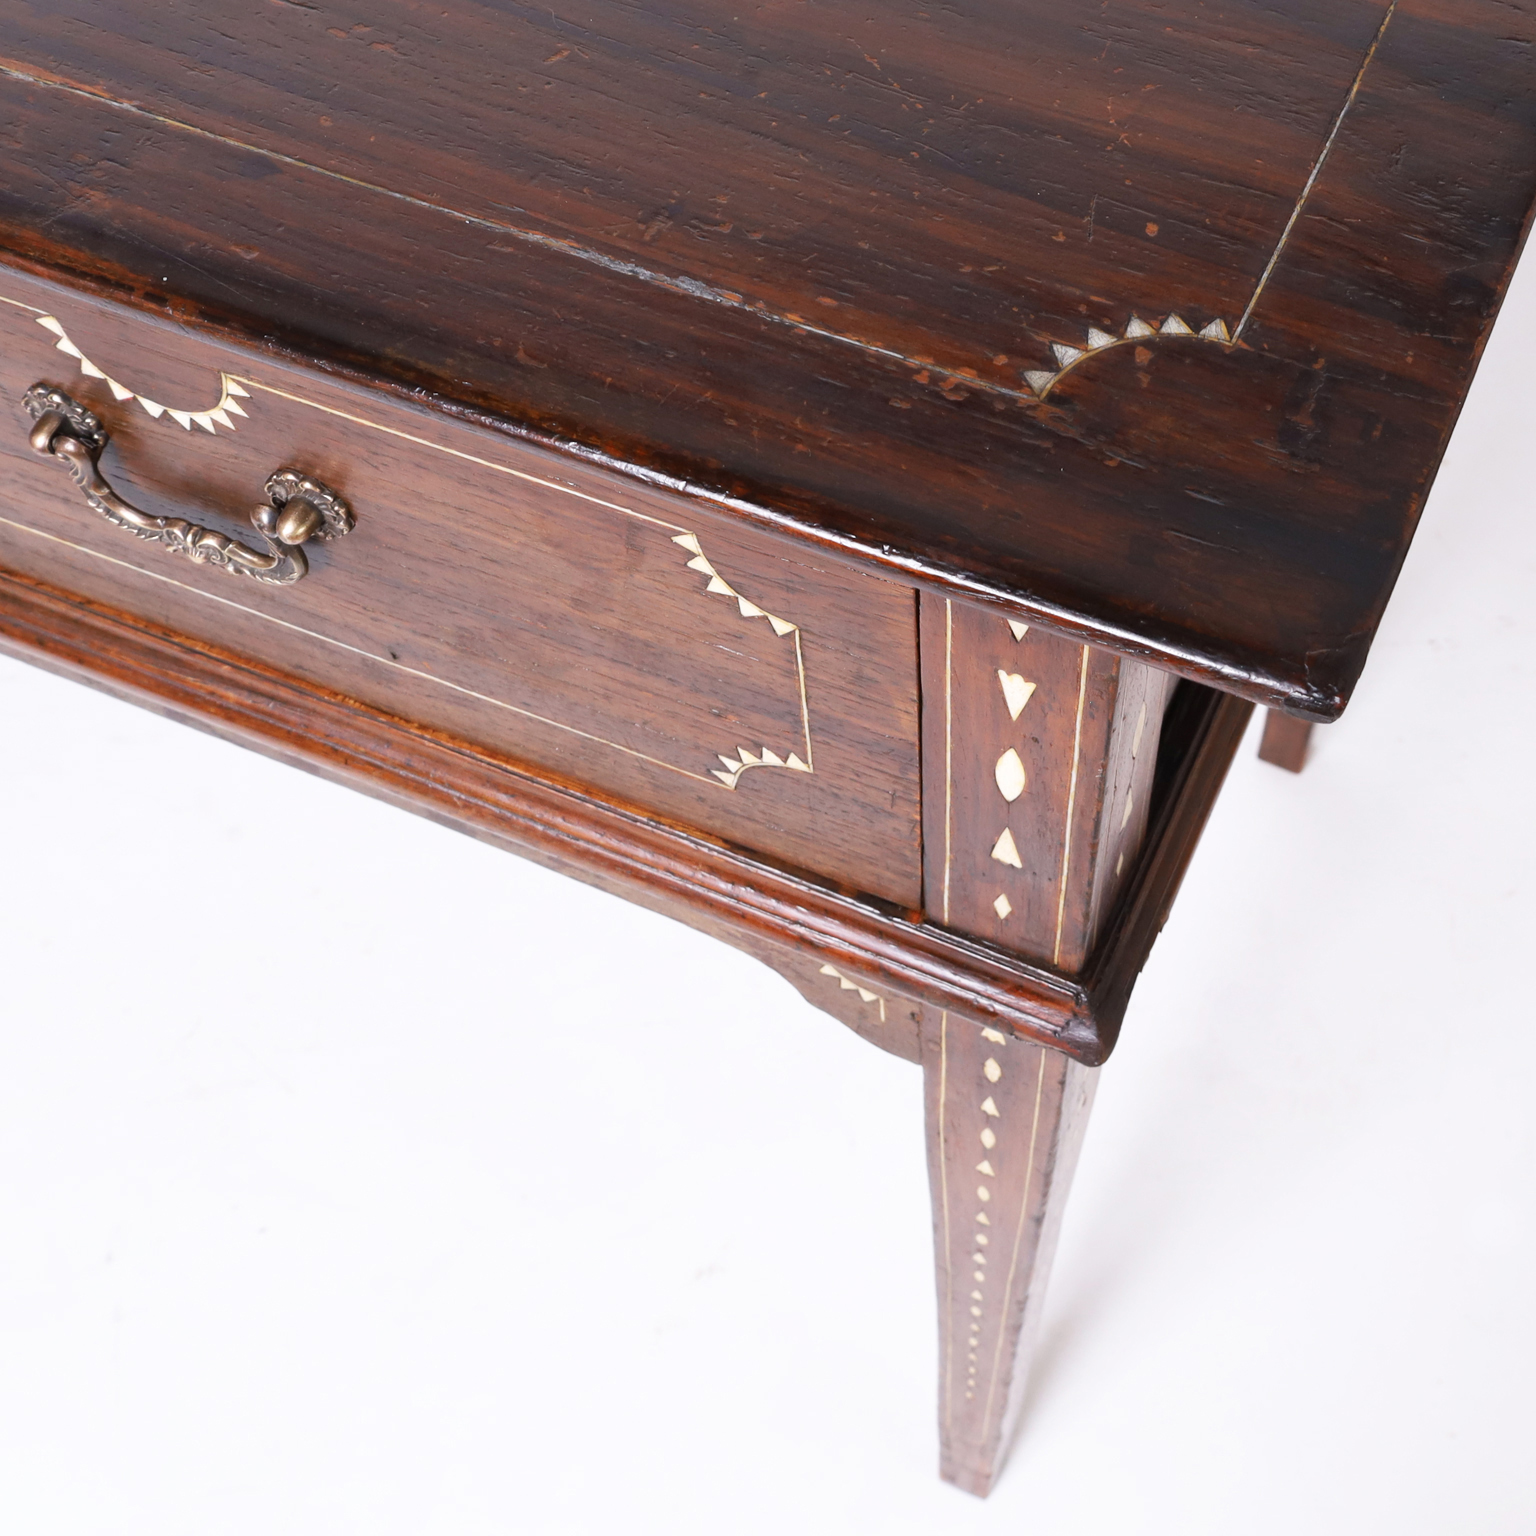 Antique Anglo Indian Inlaid Rosewood Server